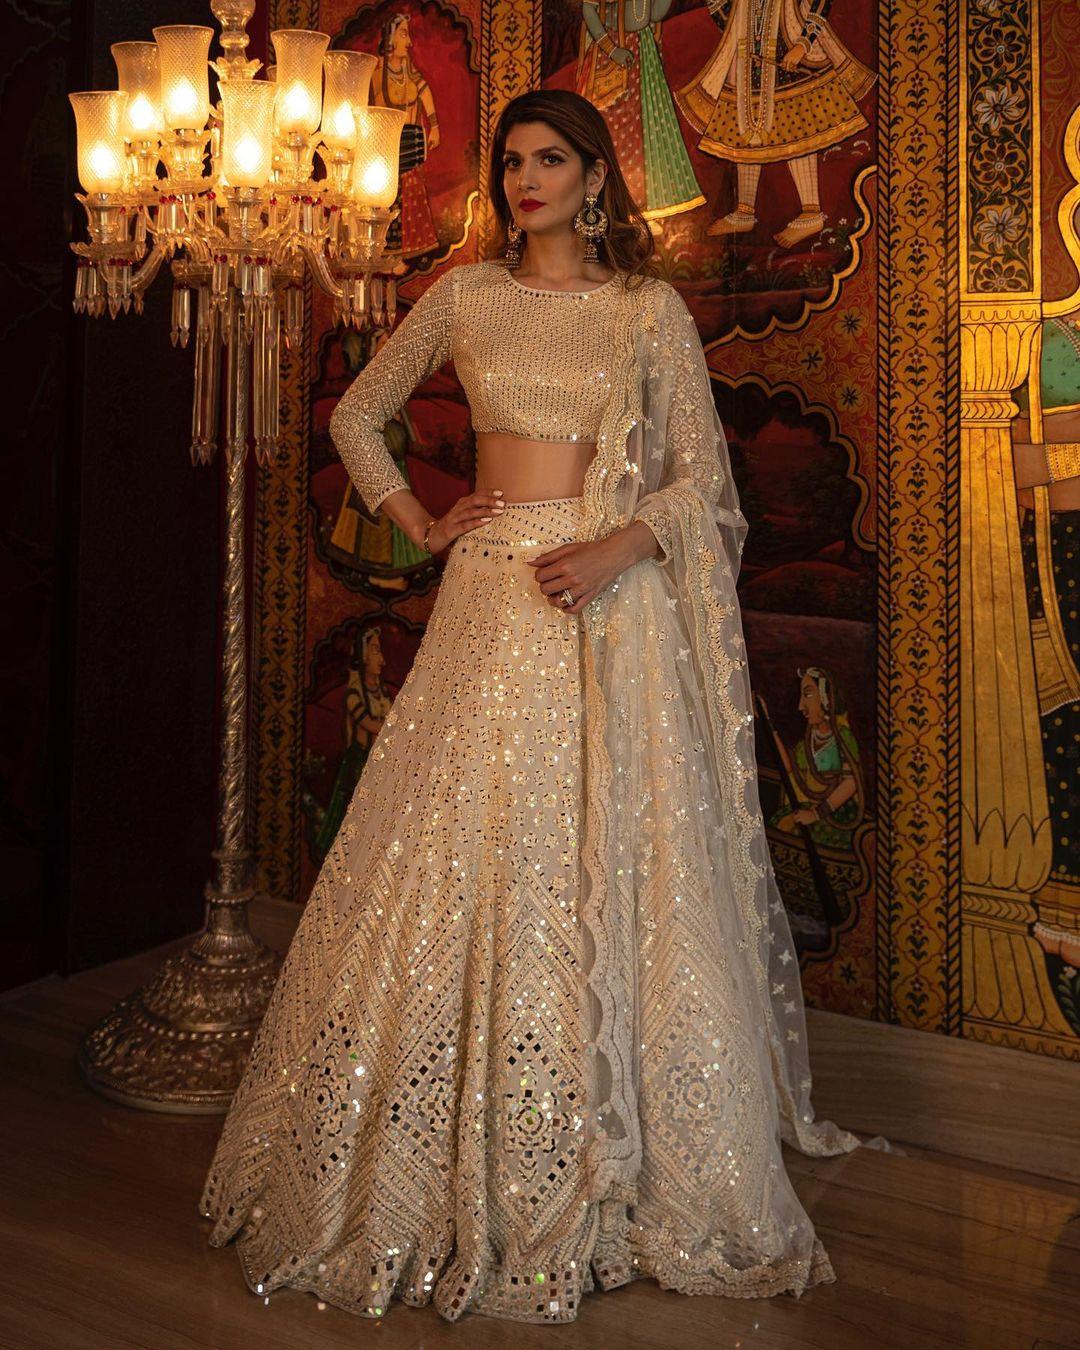 GOLDEN LEHENGA.. WHAT TO WEAR TO A SANGEET